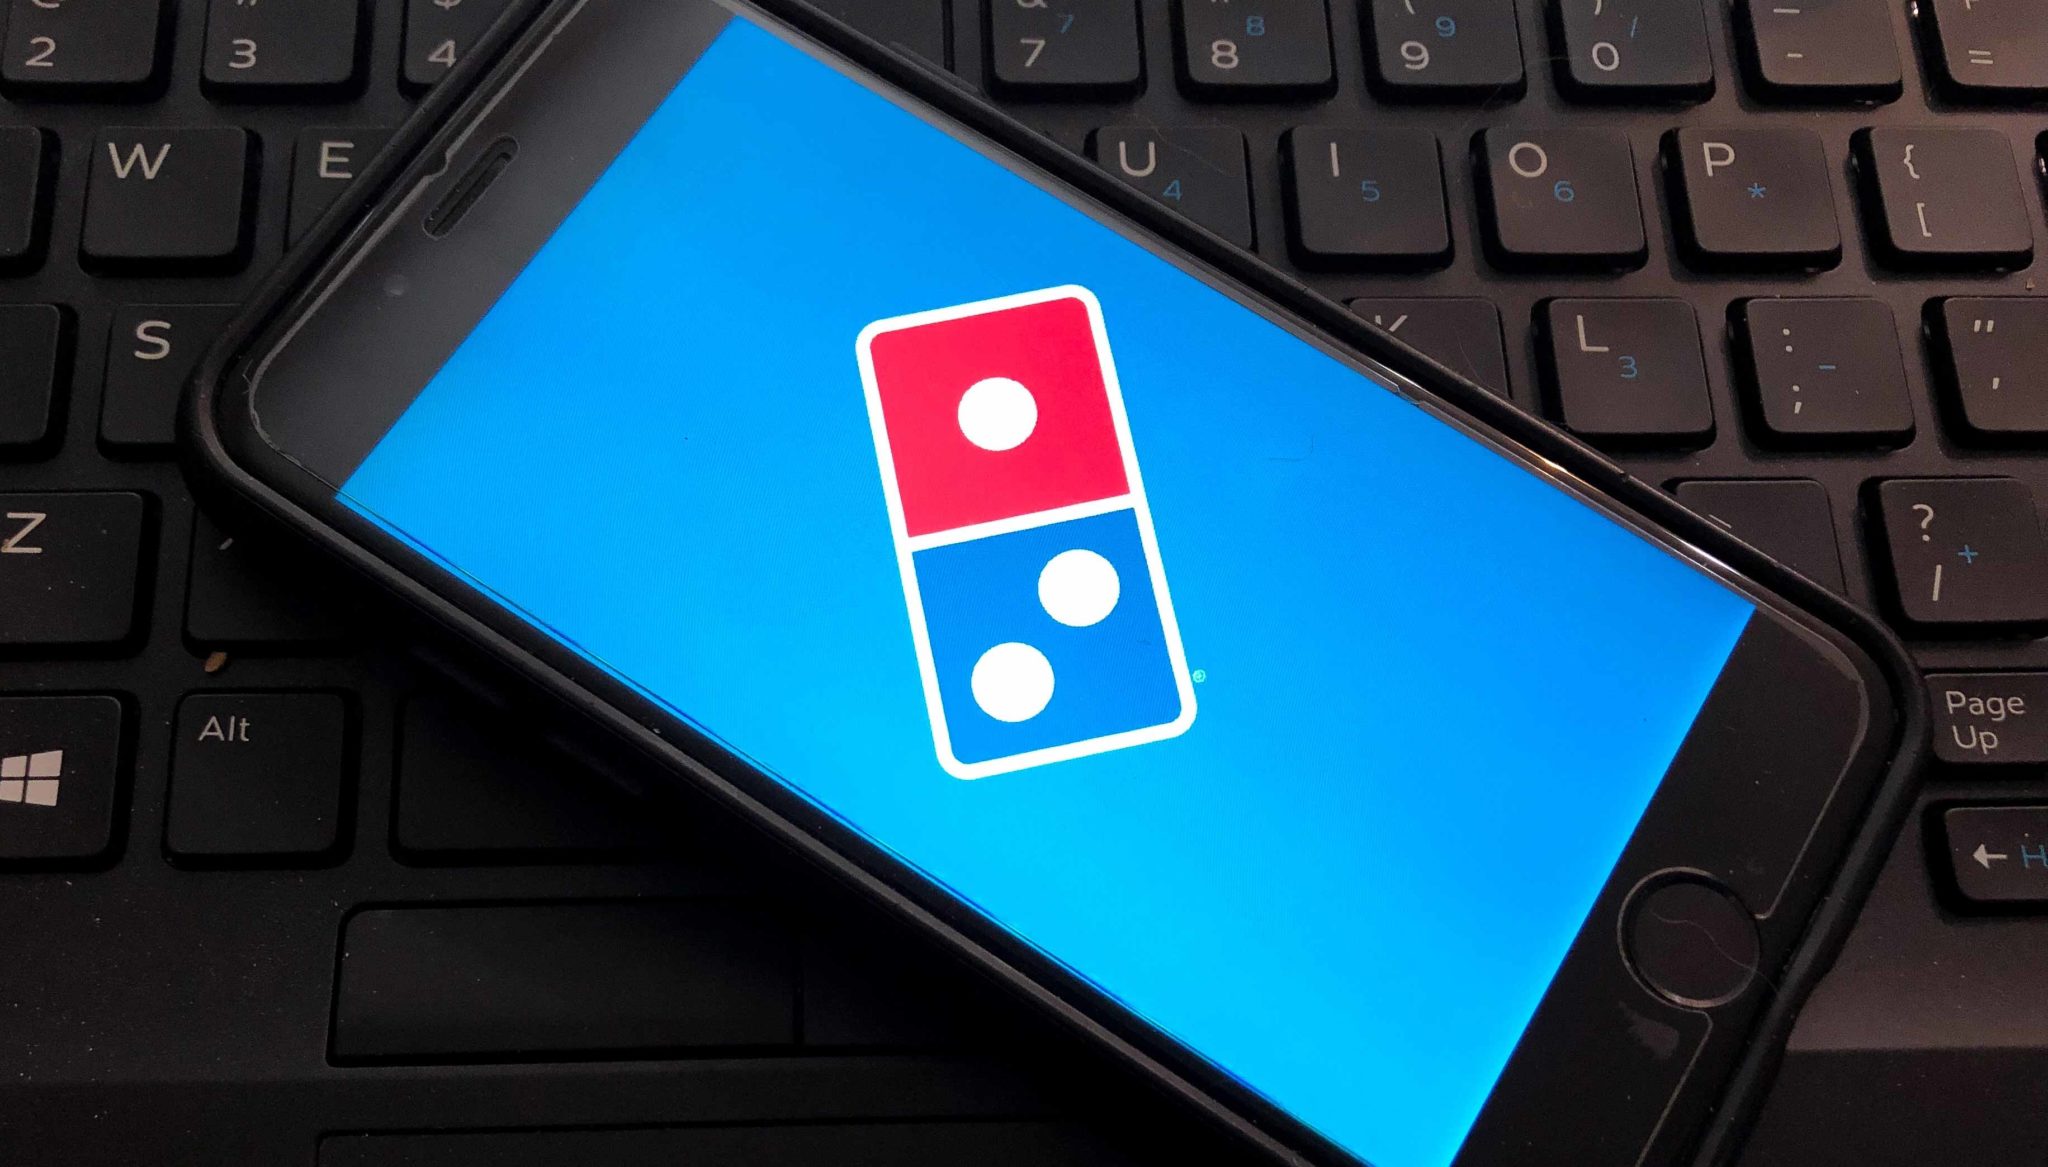 Dominos logo on the screen of a smartphone